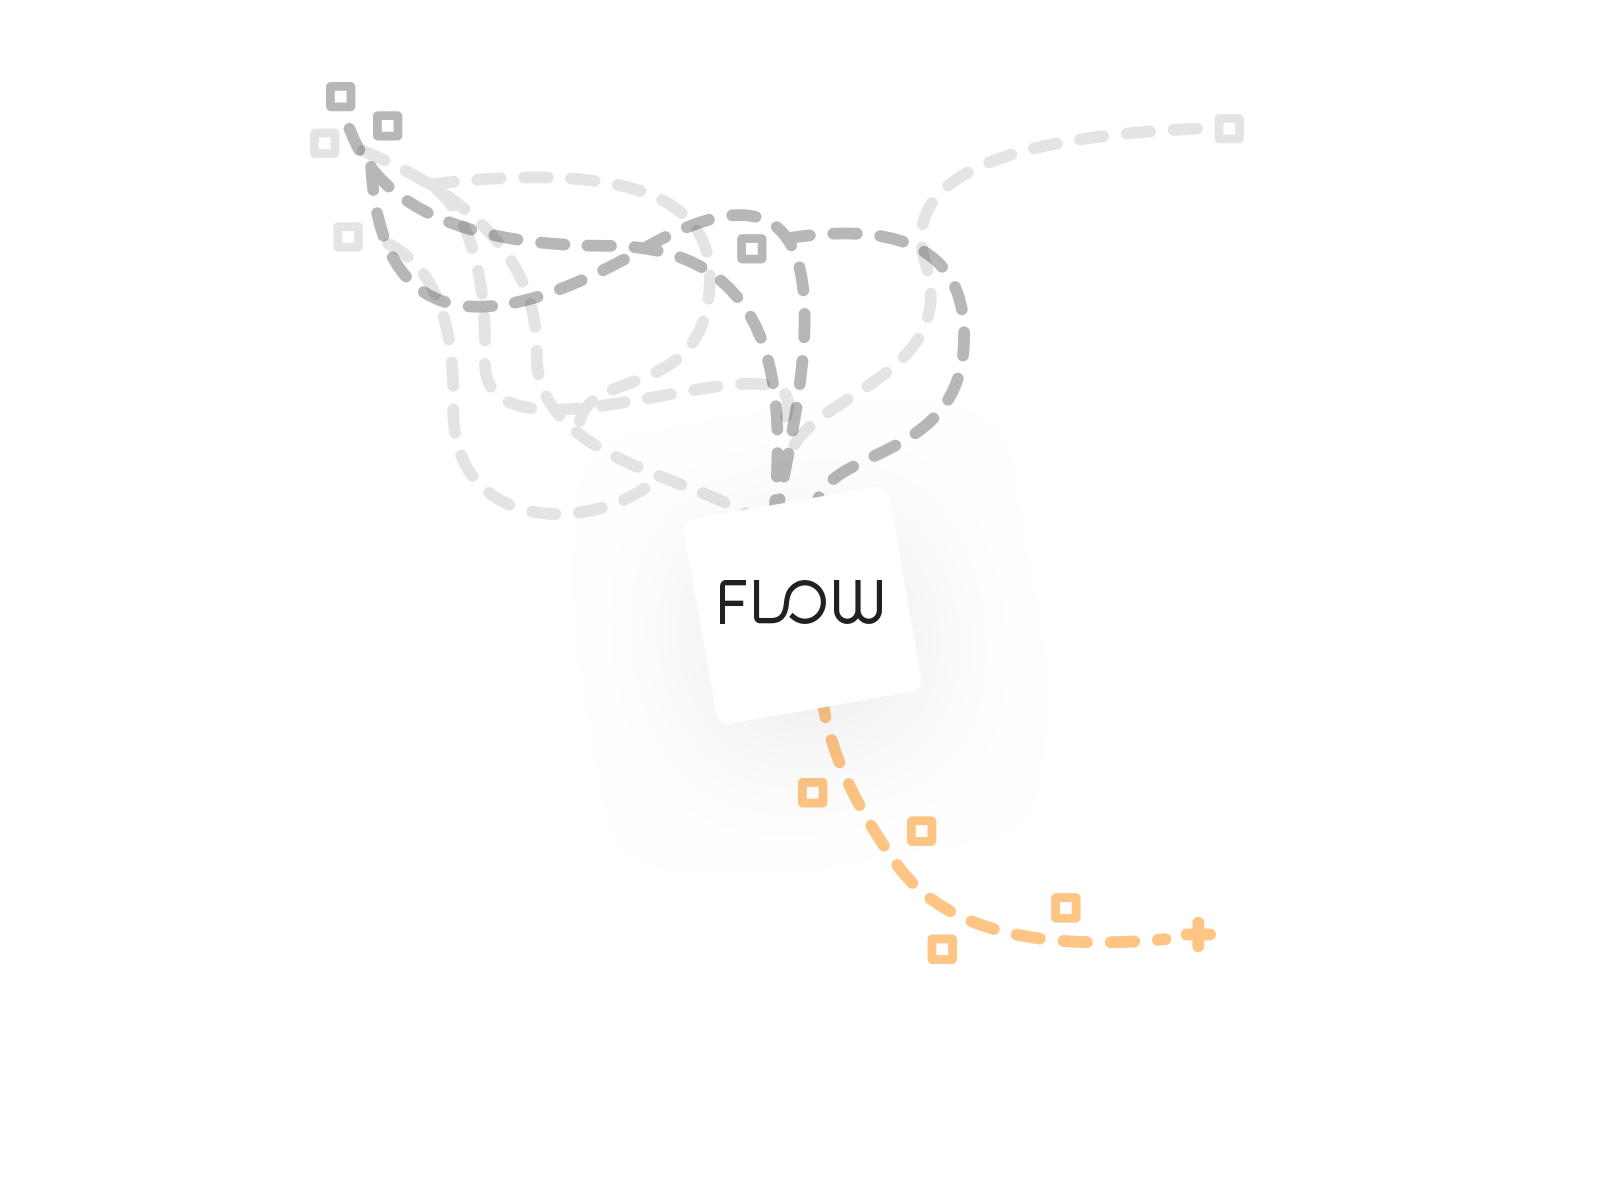 Flow logo on top of a white square with dotted lines connecting to it